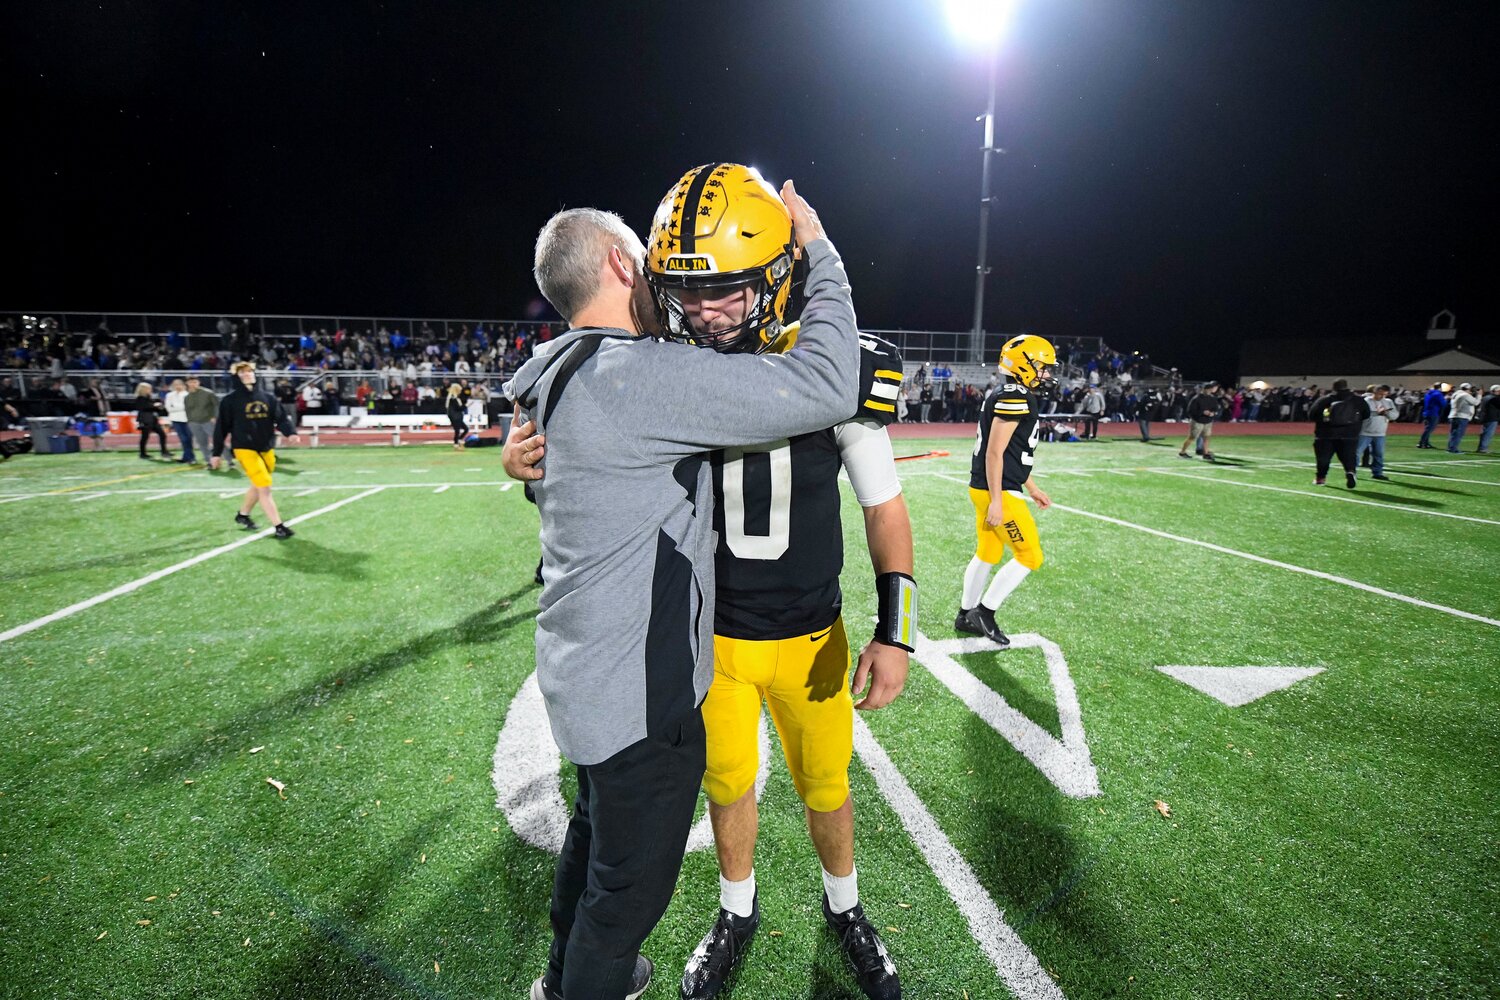 A dejected Cooper Taylor of Central Bucks West gets a hug from Central Bucks South coach Tom Hetrick.